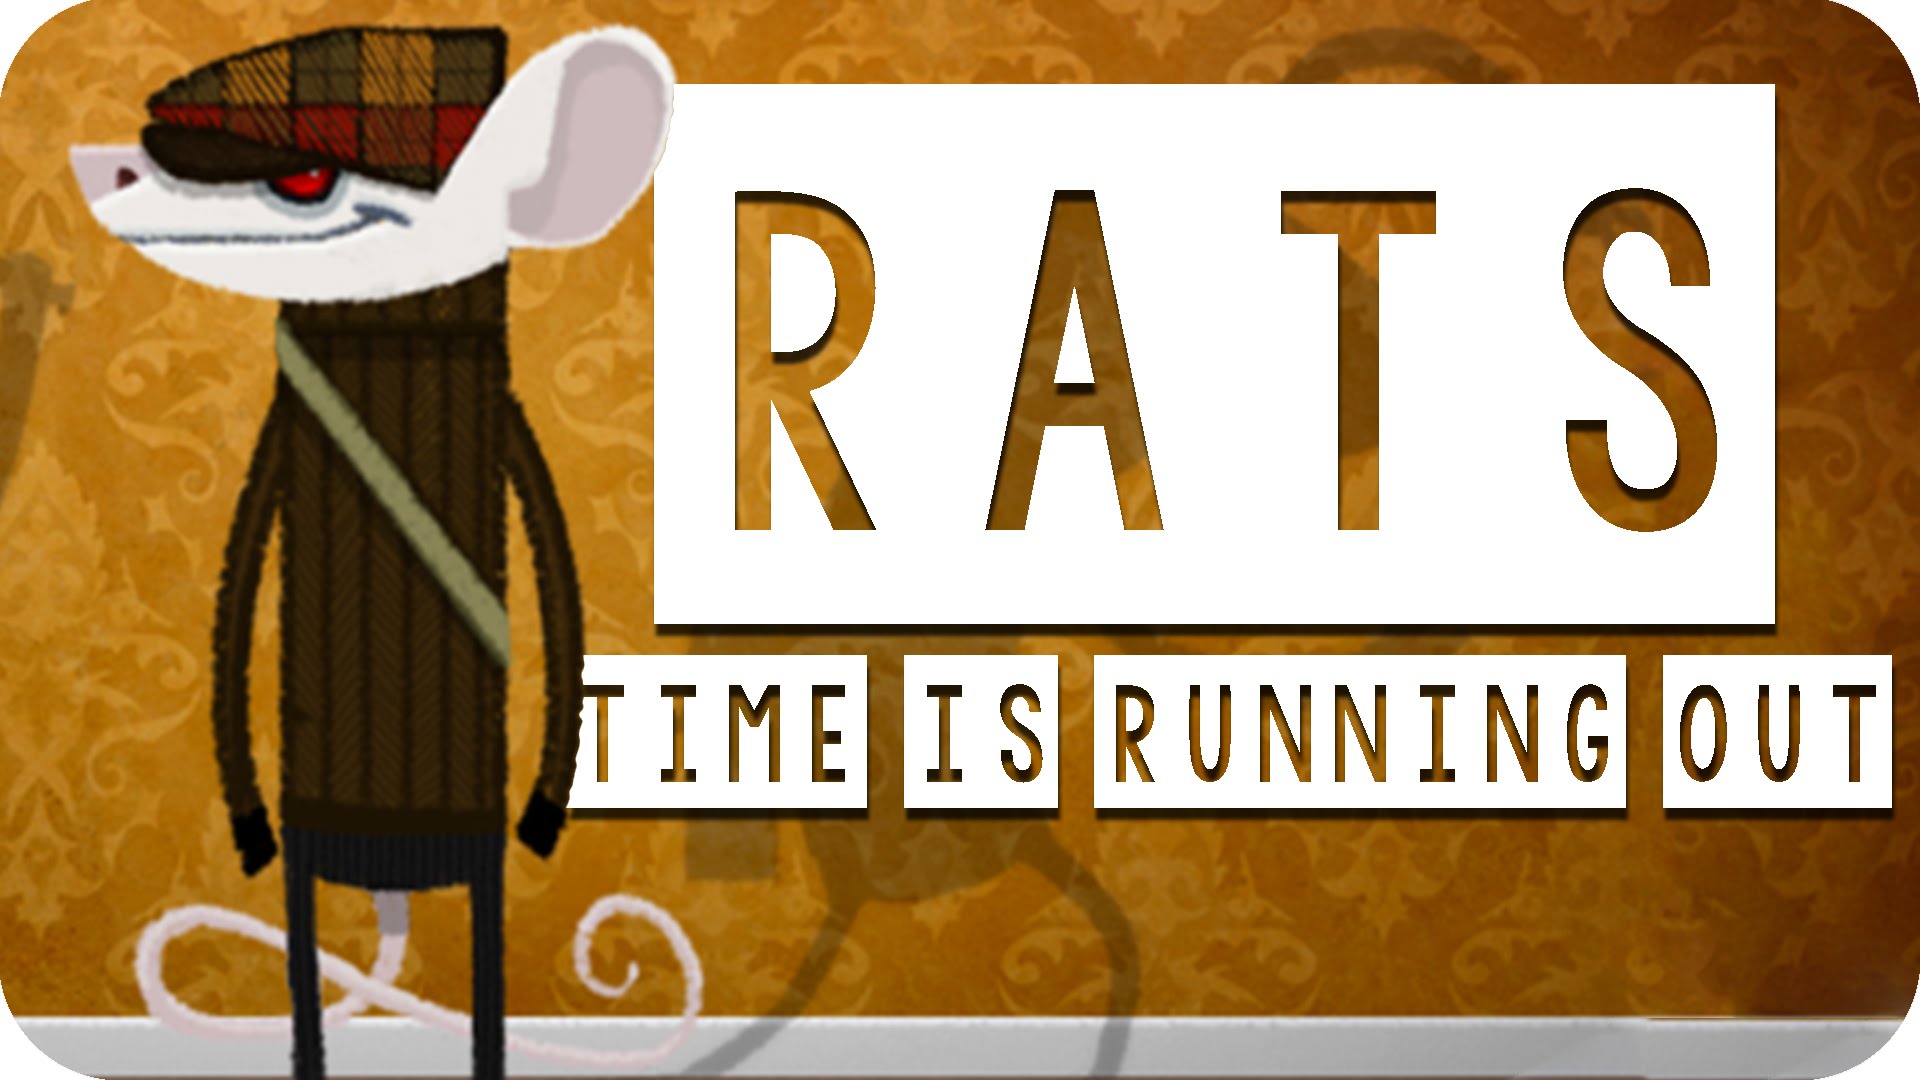 Rats - Time Is Running Out! #20